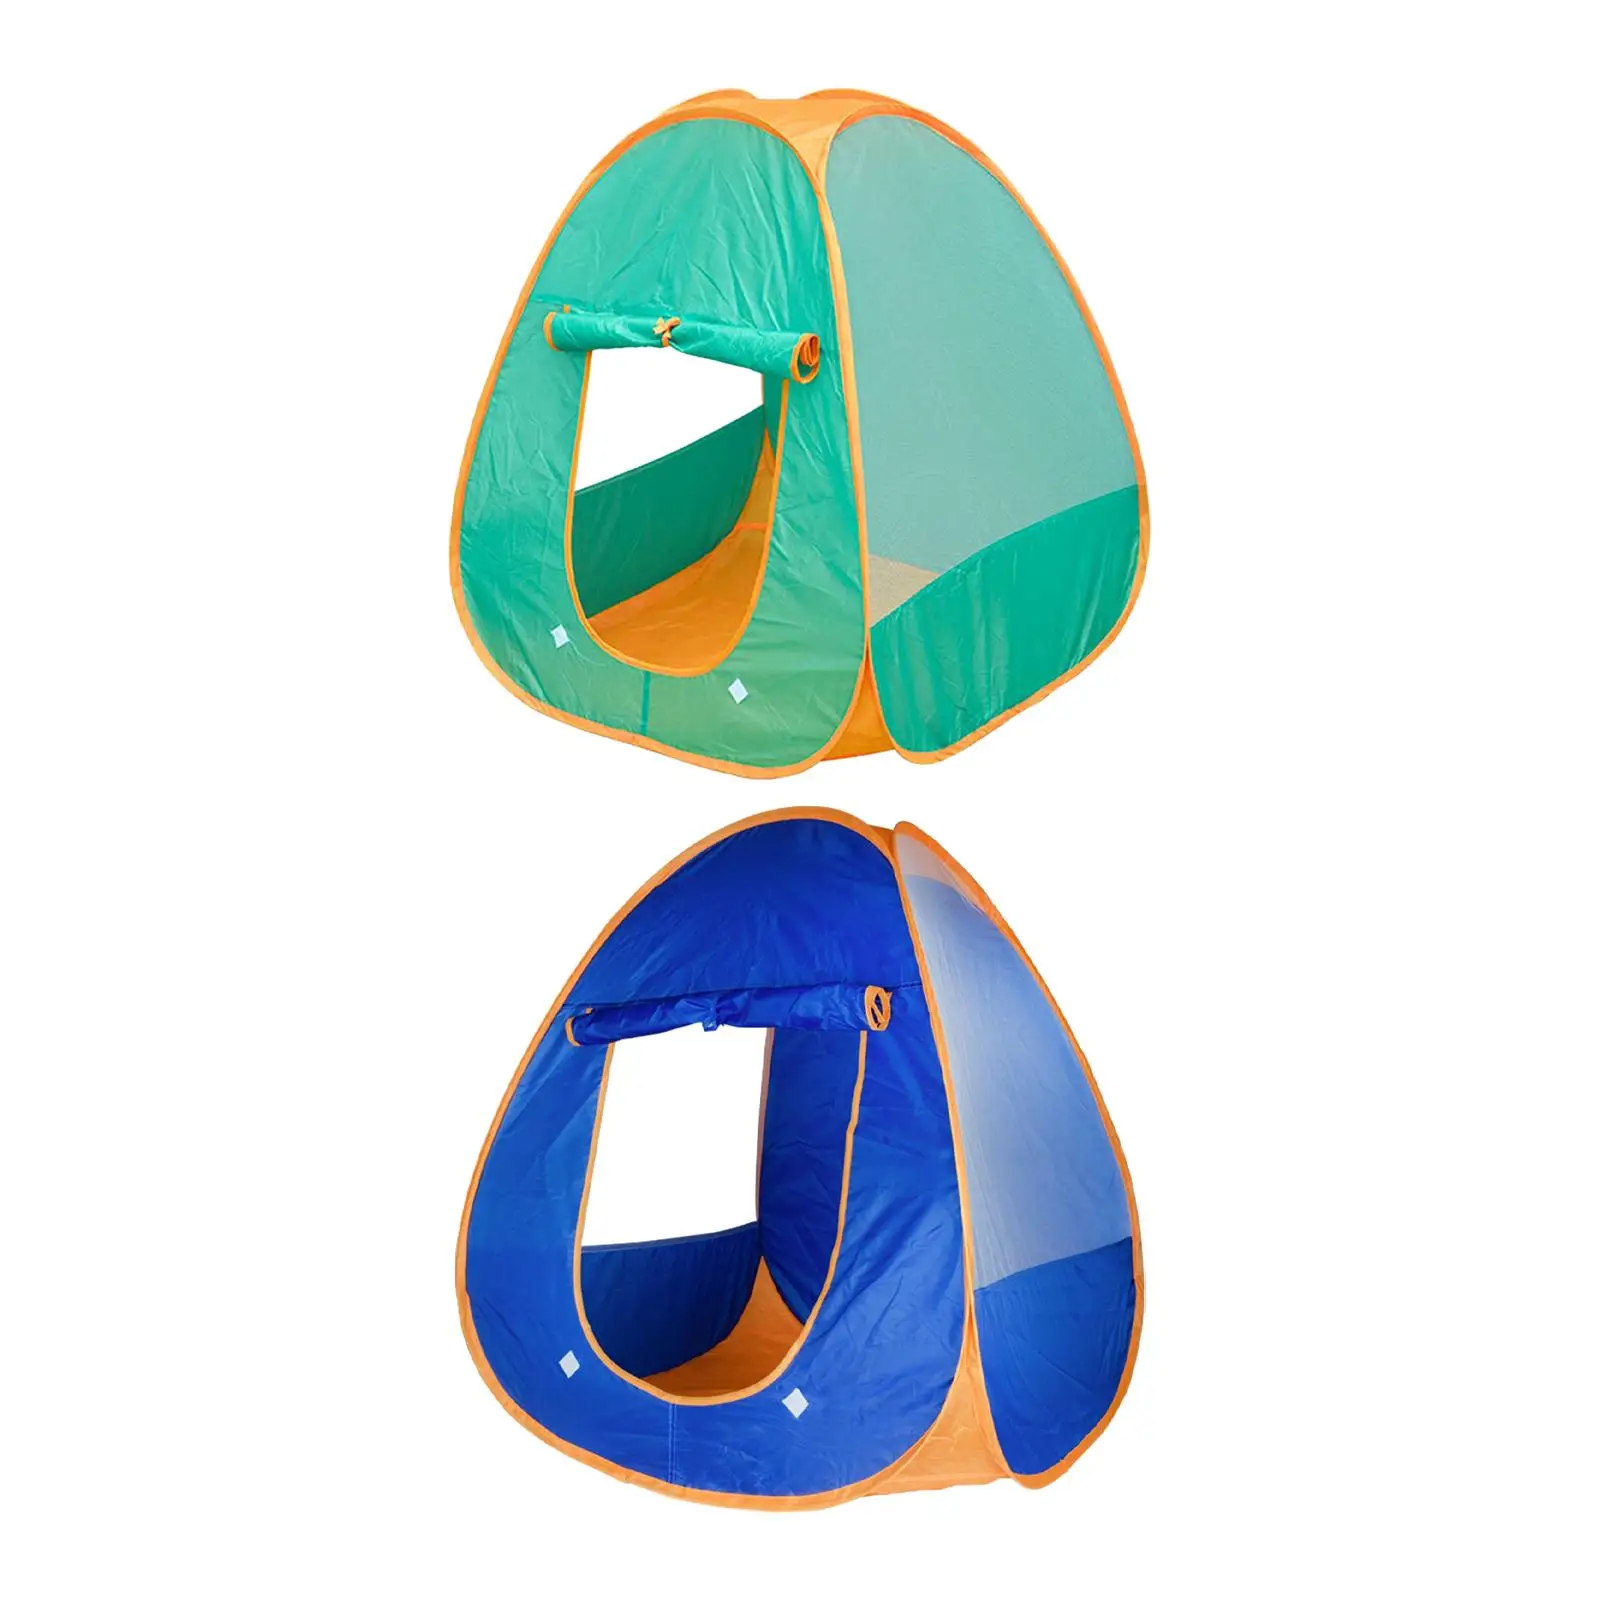 Children Play Tent Foldable Play Mat Pretend Play Portable Christmas Gifts for Indoor Outdoor Party Nursery Room Beach Camping